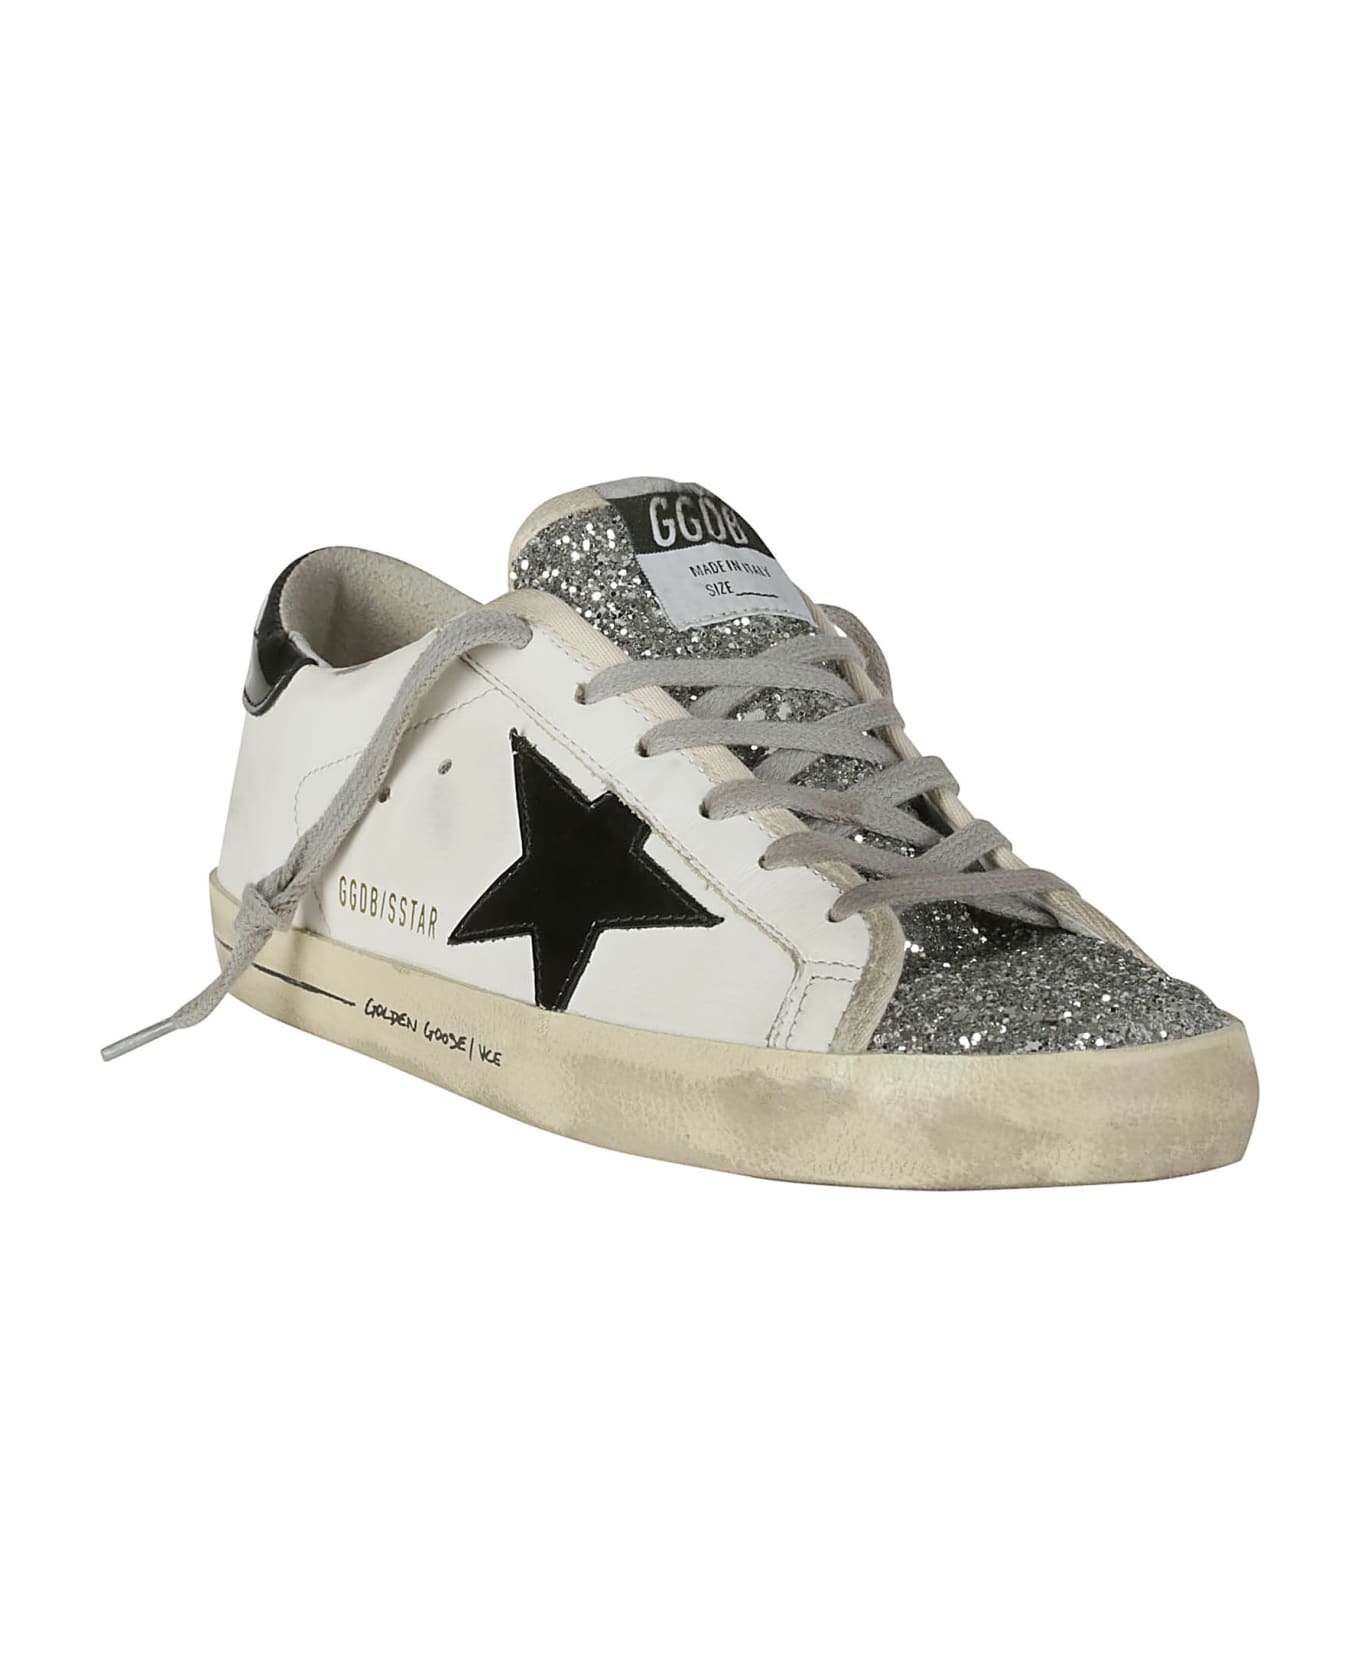 Golden Goose Superstar Classic Sneakers Banned - WHITE/BLACK/SILVER